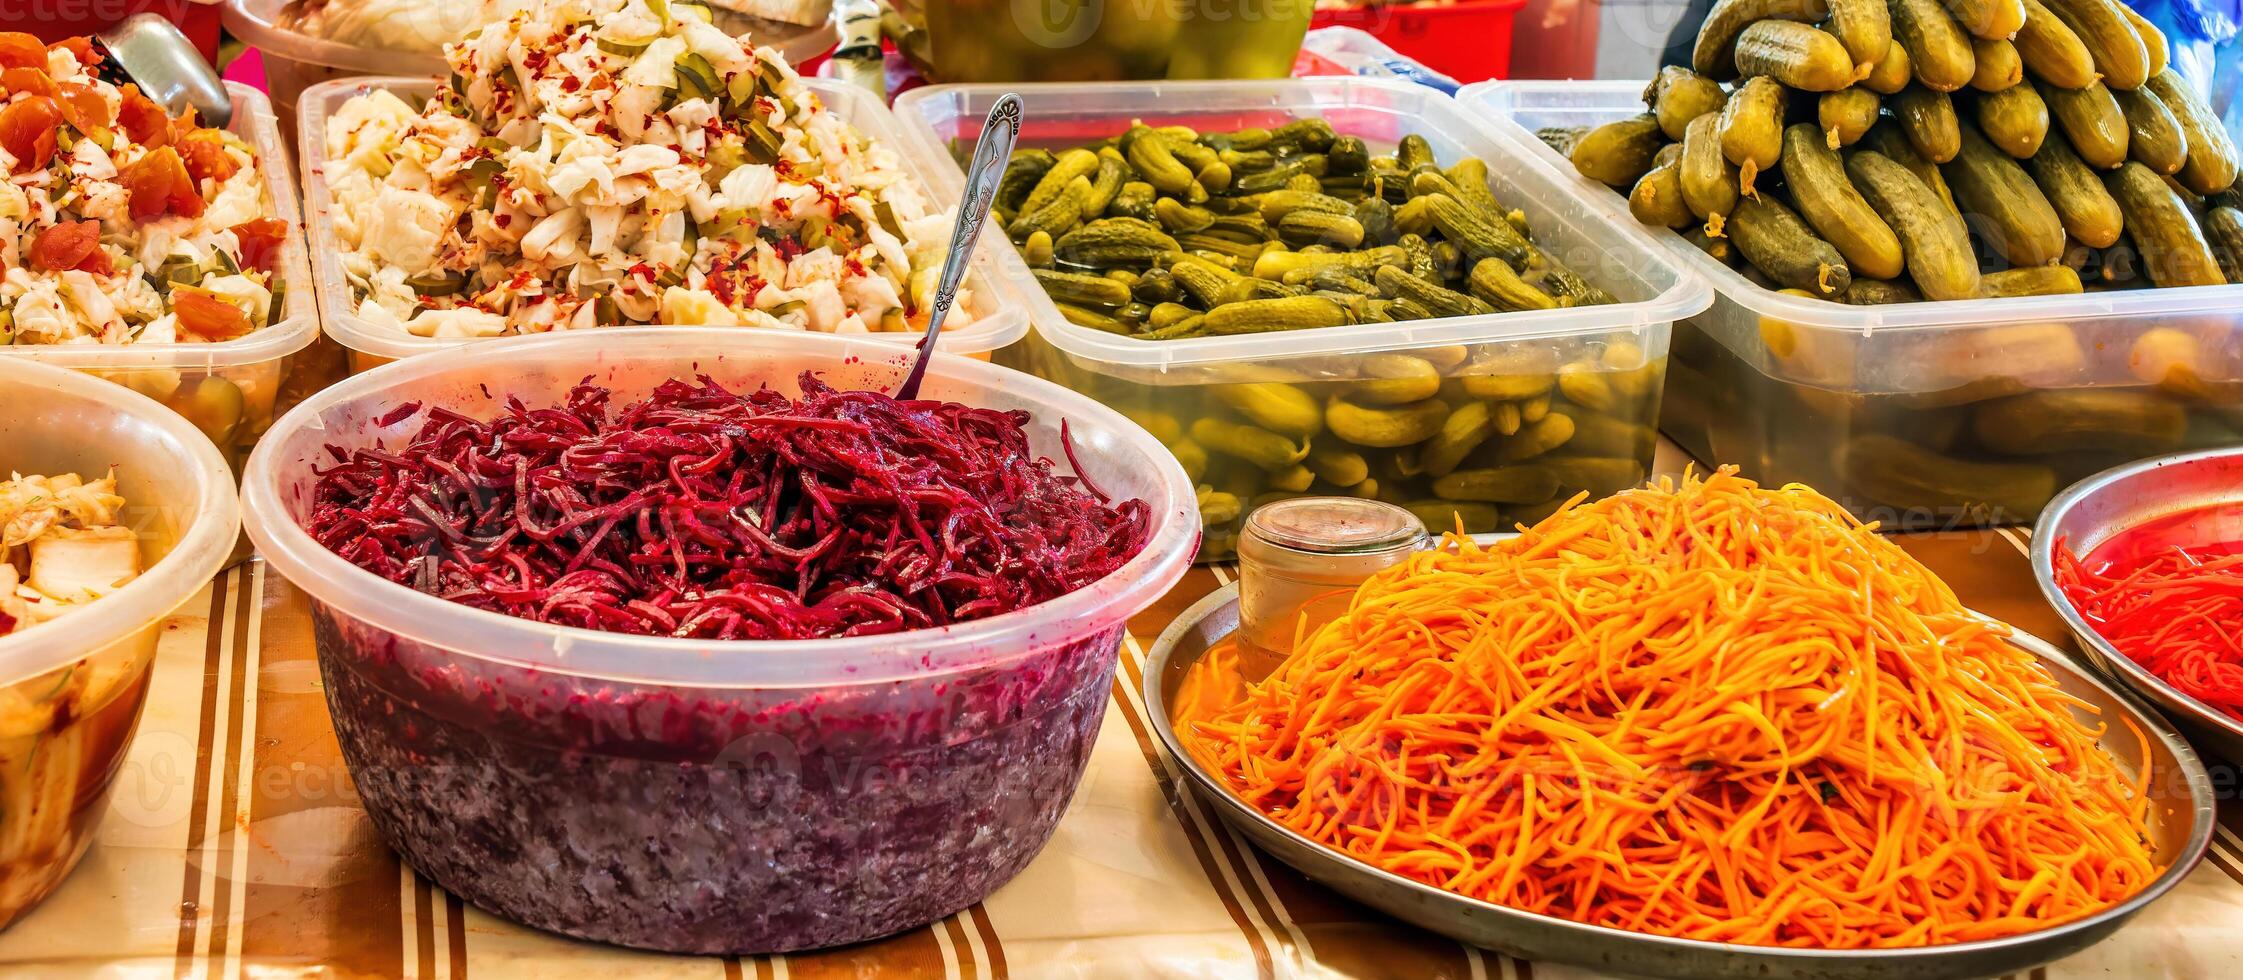 A stall with pickled vegetables at a bazaar counter. Pickled beets, cucumbers, sauerkraut, Korean-style carrots and cucumbers. photo